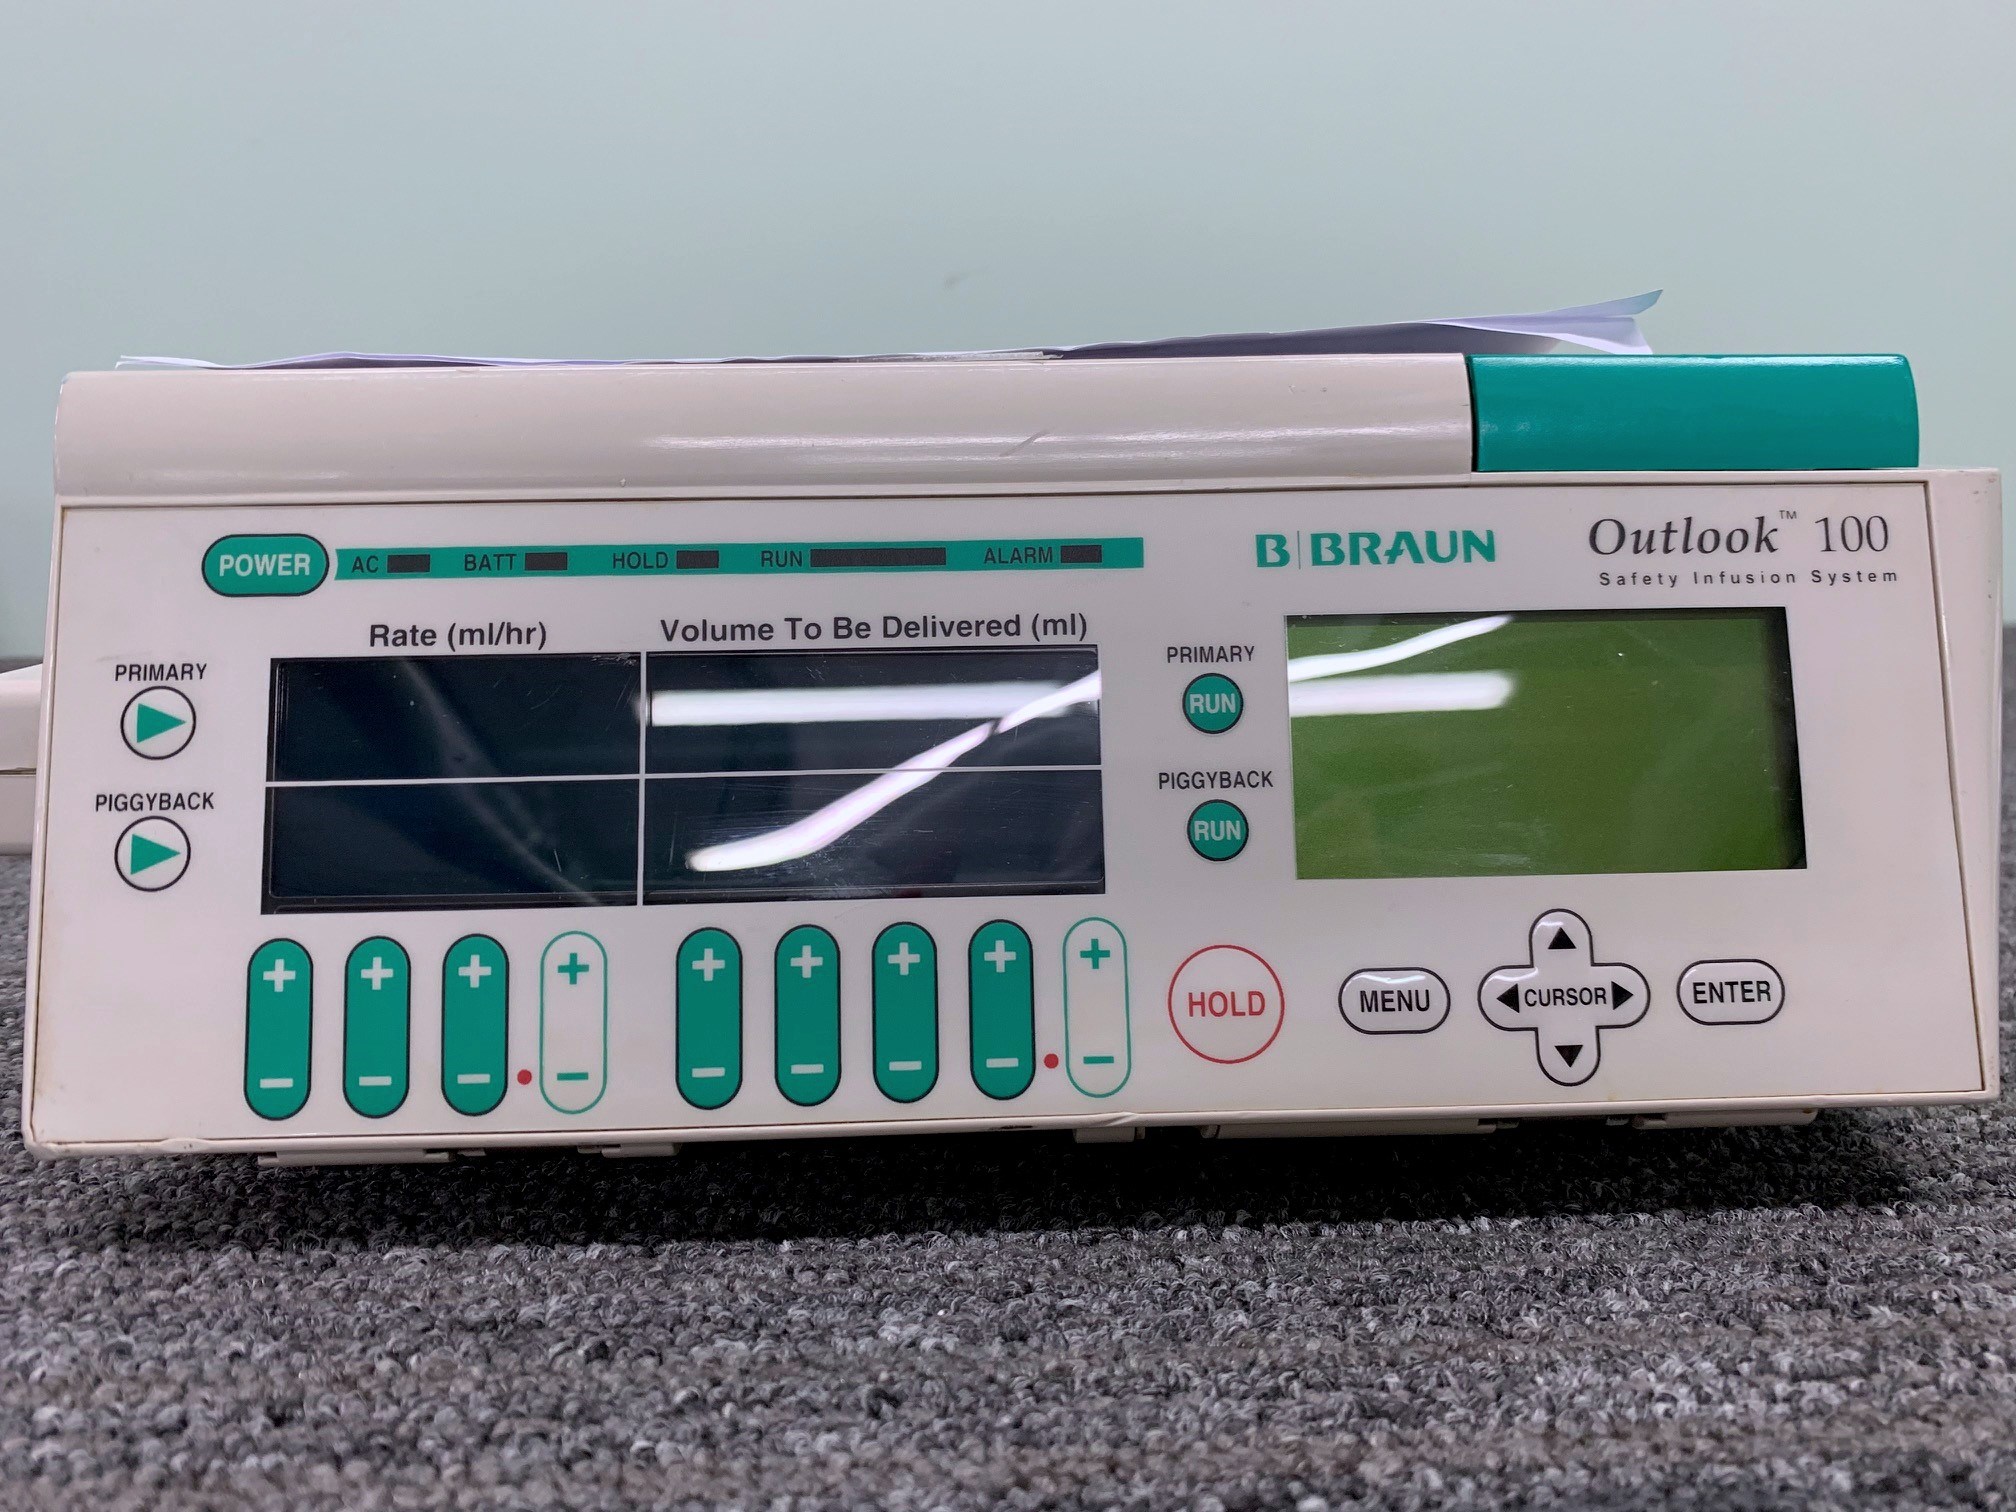 B. Braun Outlook 100 Safety Infusion System